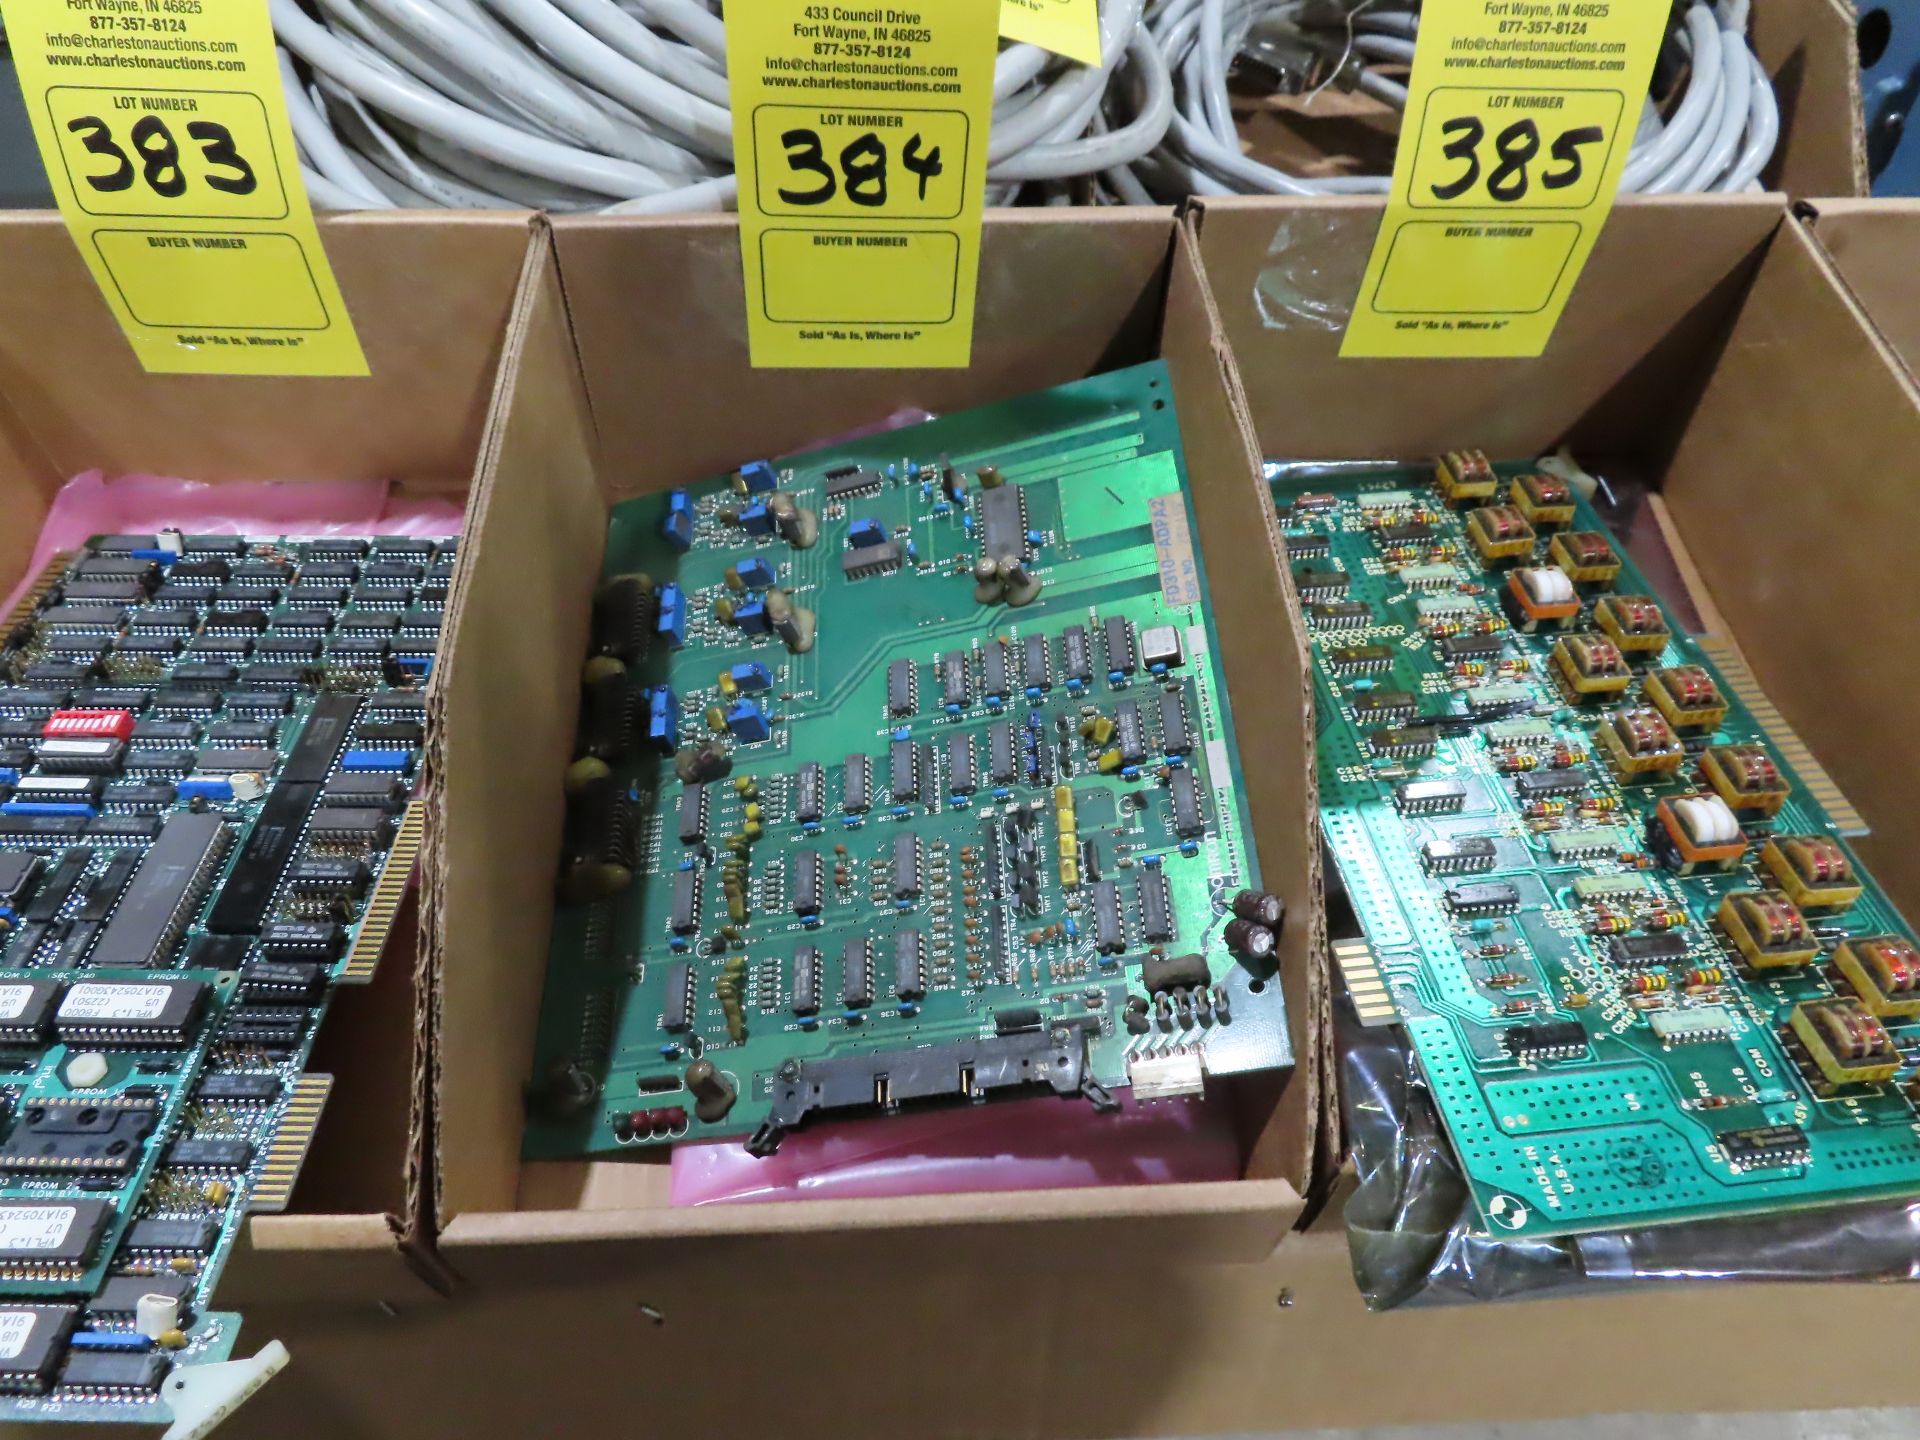 Omron FD310-ADPA2 servo controller interface, as always, with Brolyn LLC auctions, all lots can be